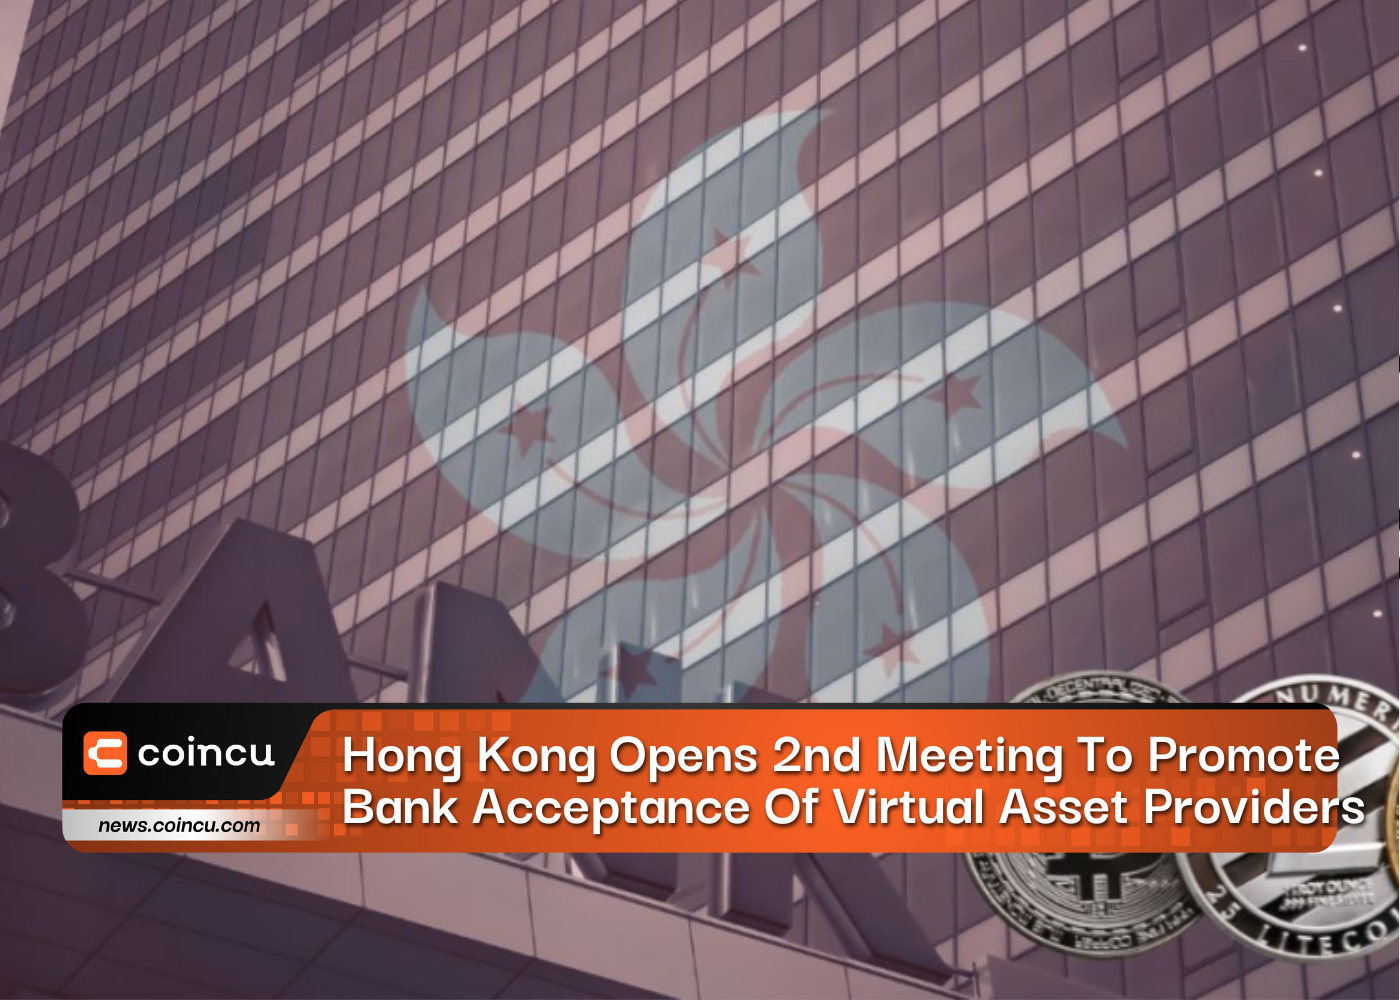 Hong Kong Opens 2nd Meeting To Promote Bank Acceptance Of Virtual Asset Providers